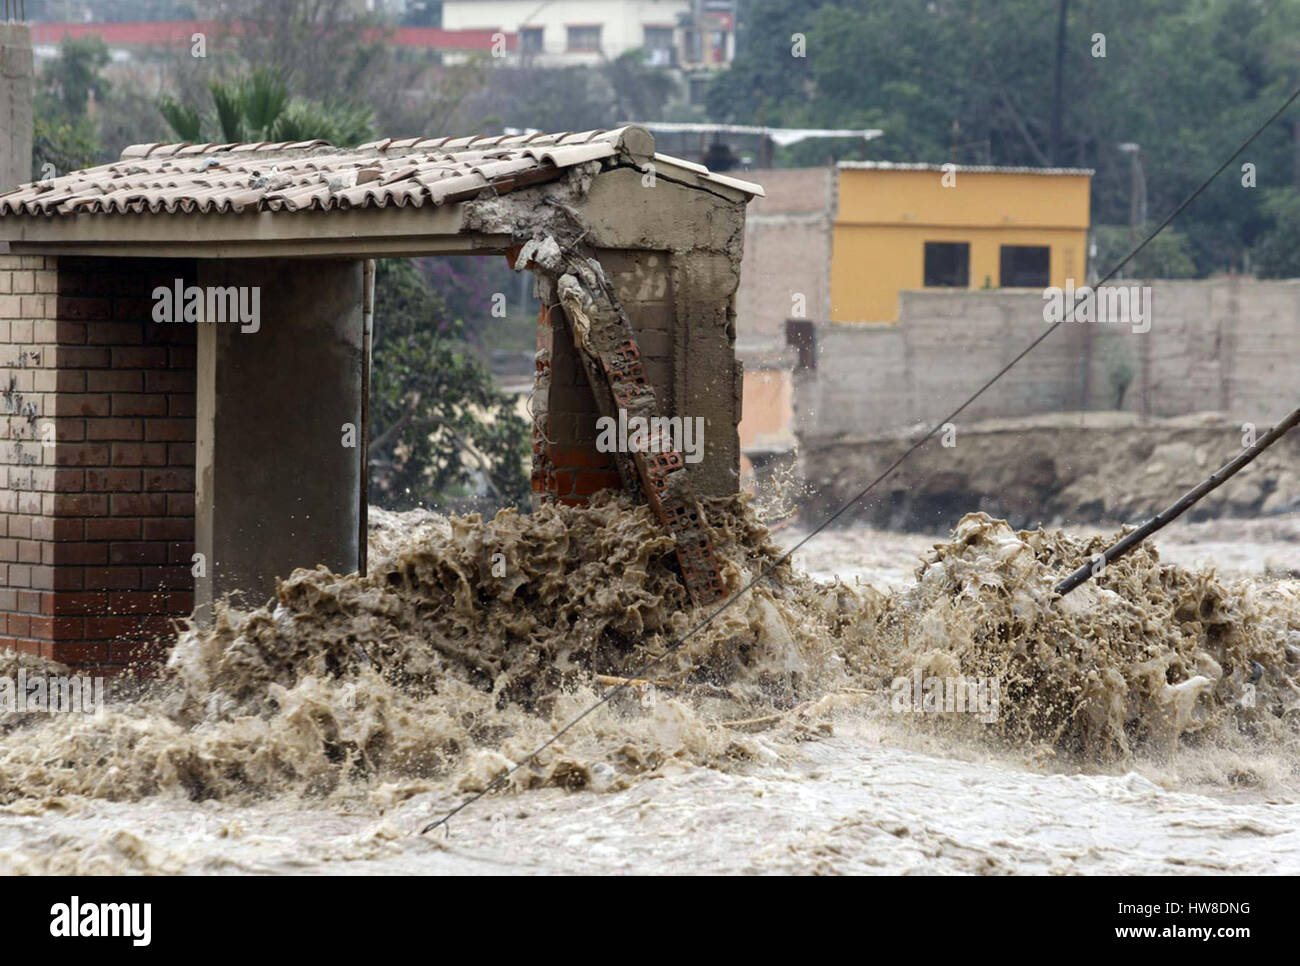 Lima, Peru. 18th Mar, 2017. A house is damaged in the flood in Lima, Peru, on March 18, 2017. Peru is facing a critical situation due to the coastal El Nino phenomenon which has been battering the country with endless rainfall for weeks, causing severe social and economic consequences. Credit: Eddy Ramos/ANDINA/Xinhua/Alamy Live News Stock Photo